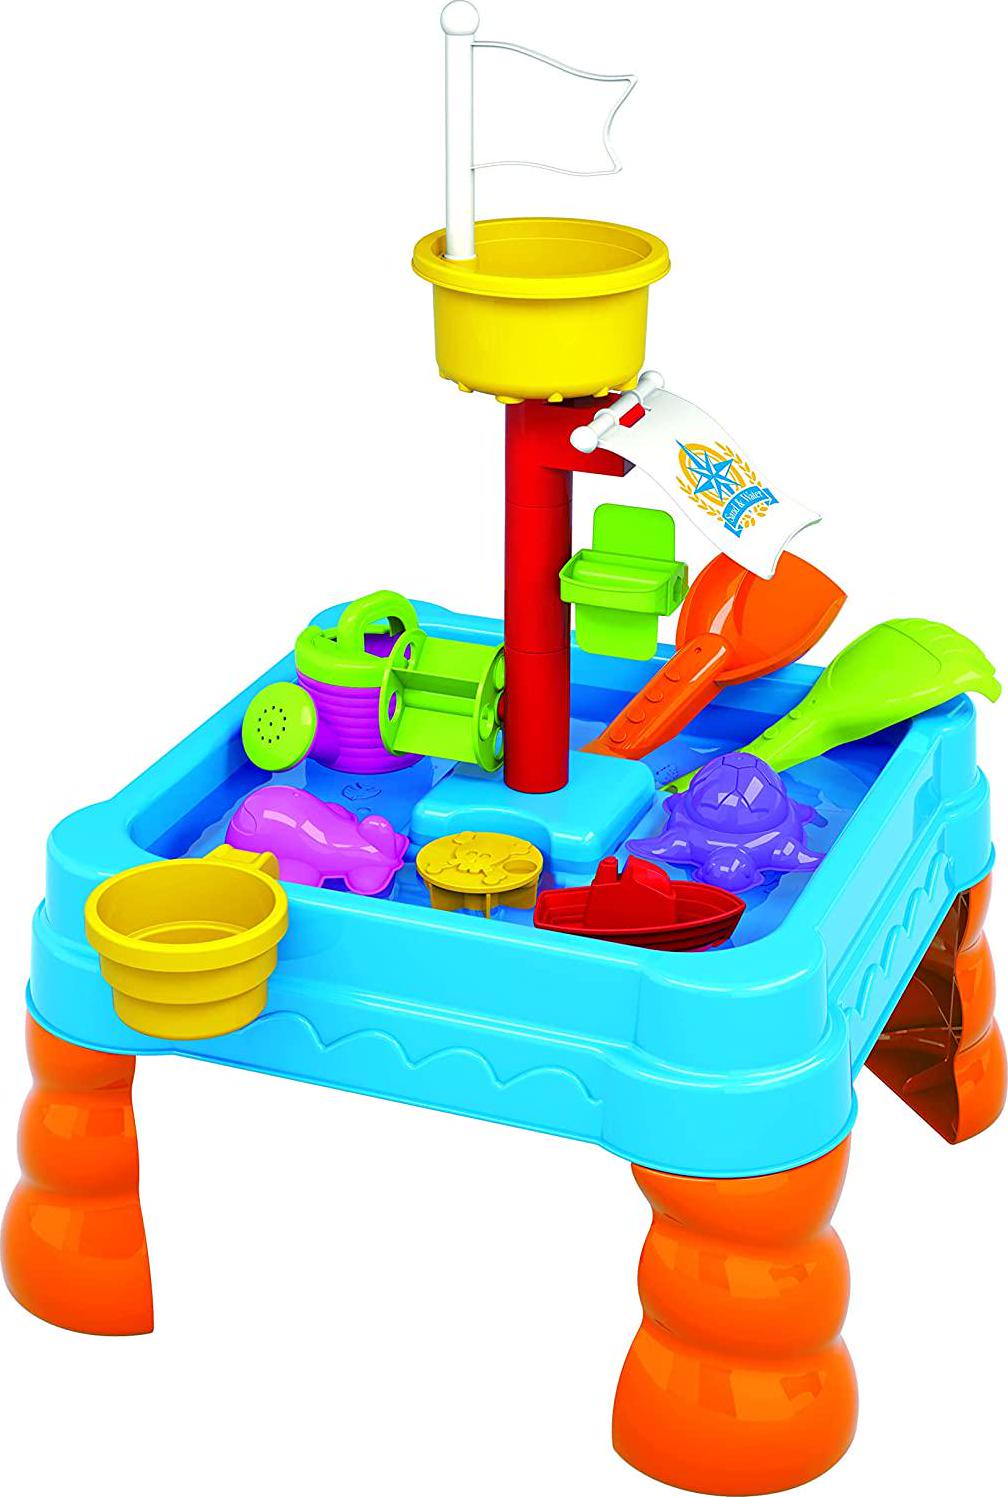 Lenoxx, Lenoxx Kids Sand and Water Table - Toddler Bubble Splash Water Table - Splash and Scoop Kids Table Detachable Legs Beach Tools and Water Cans